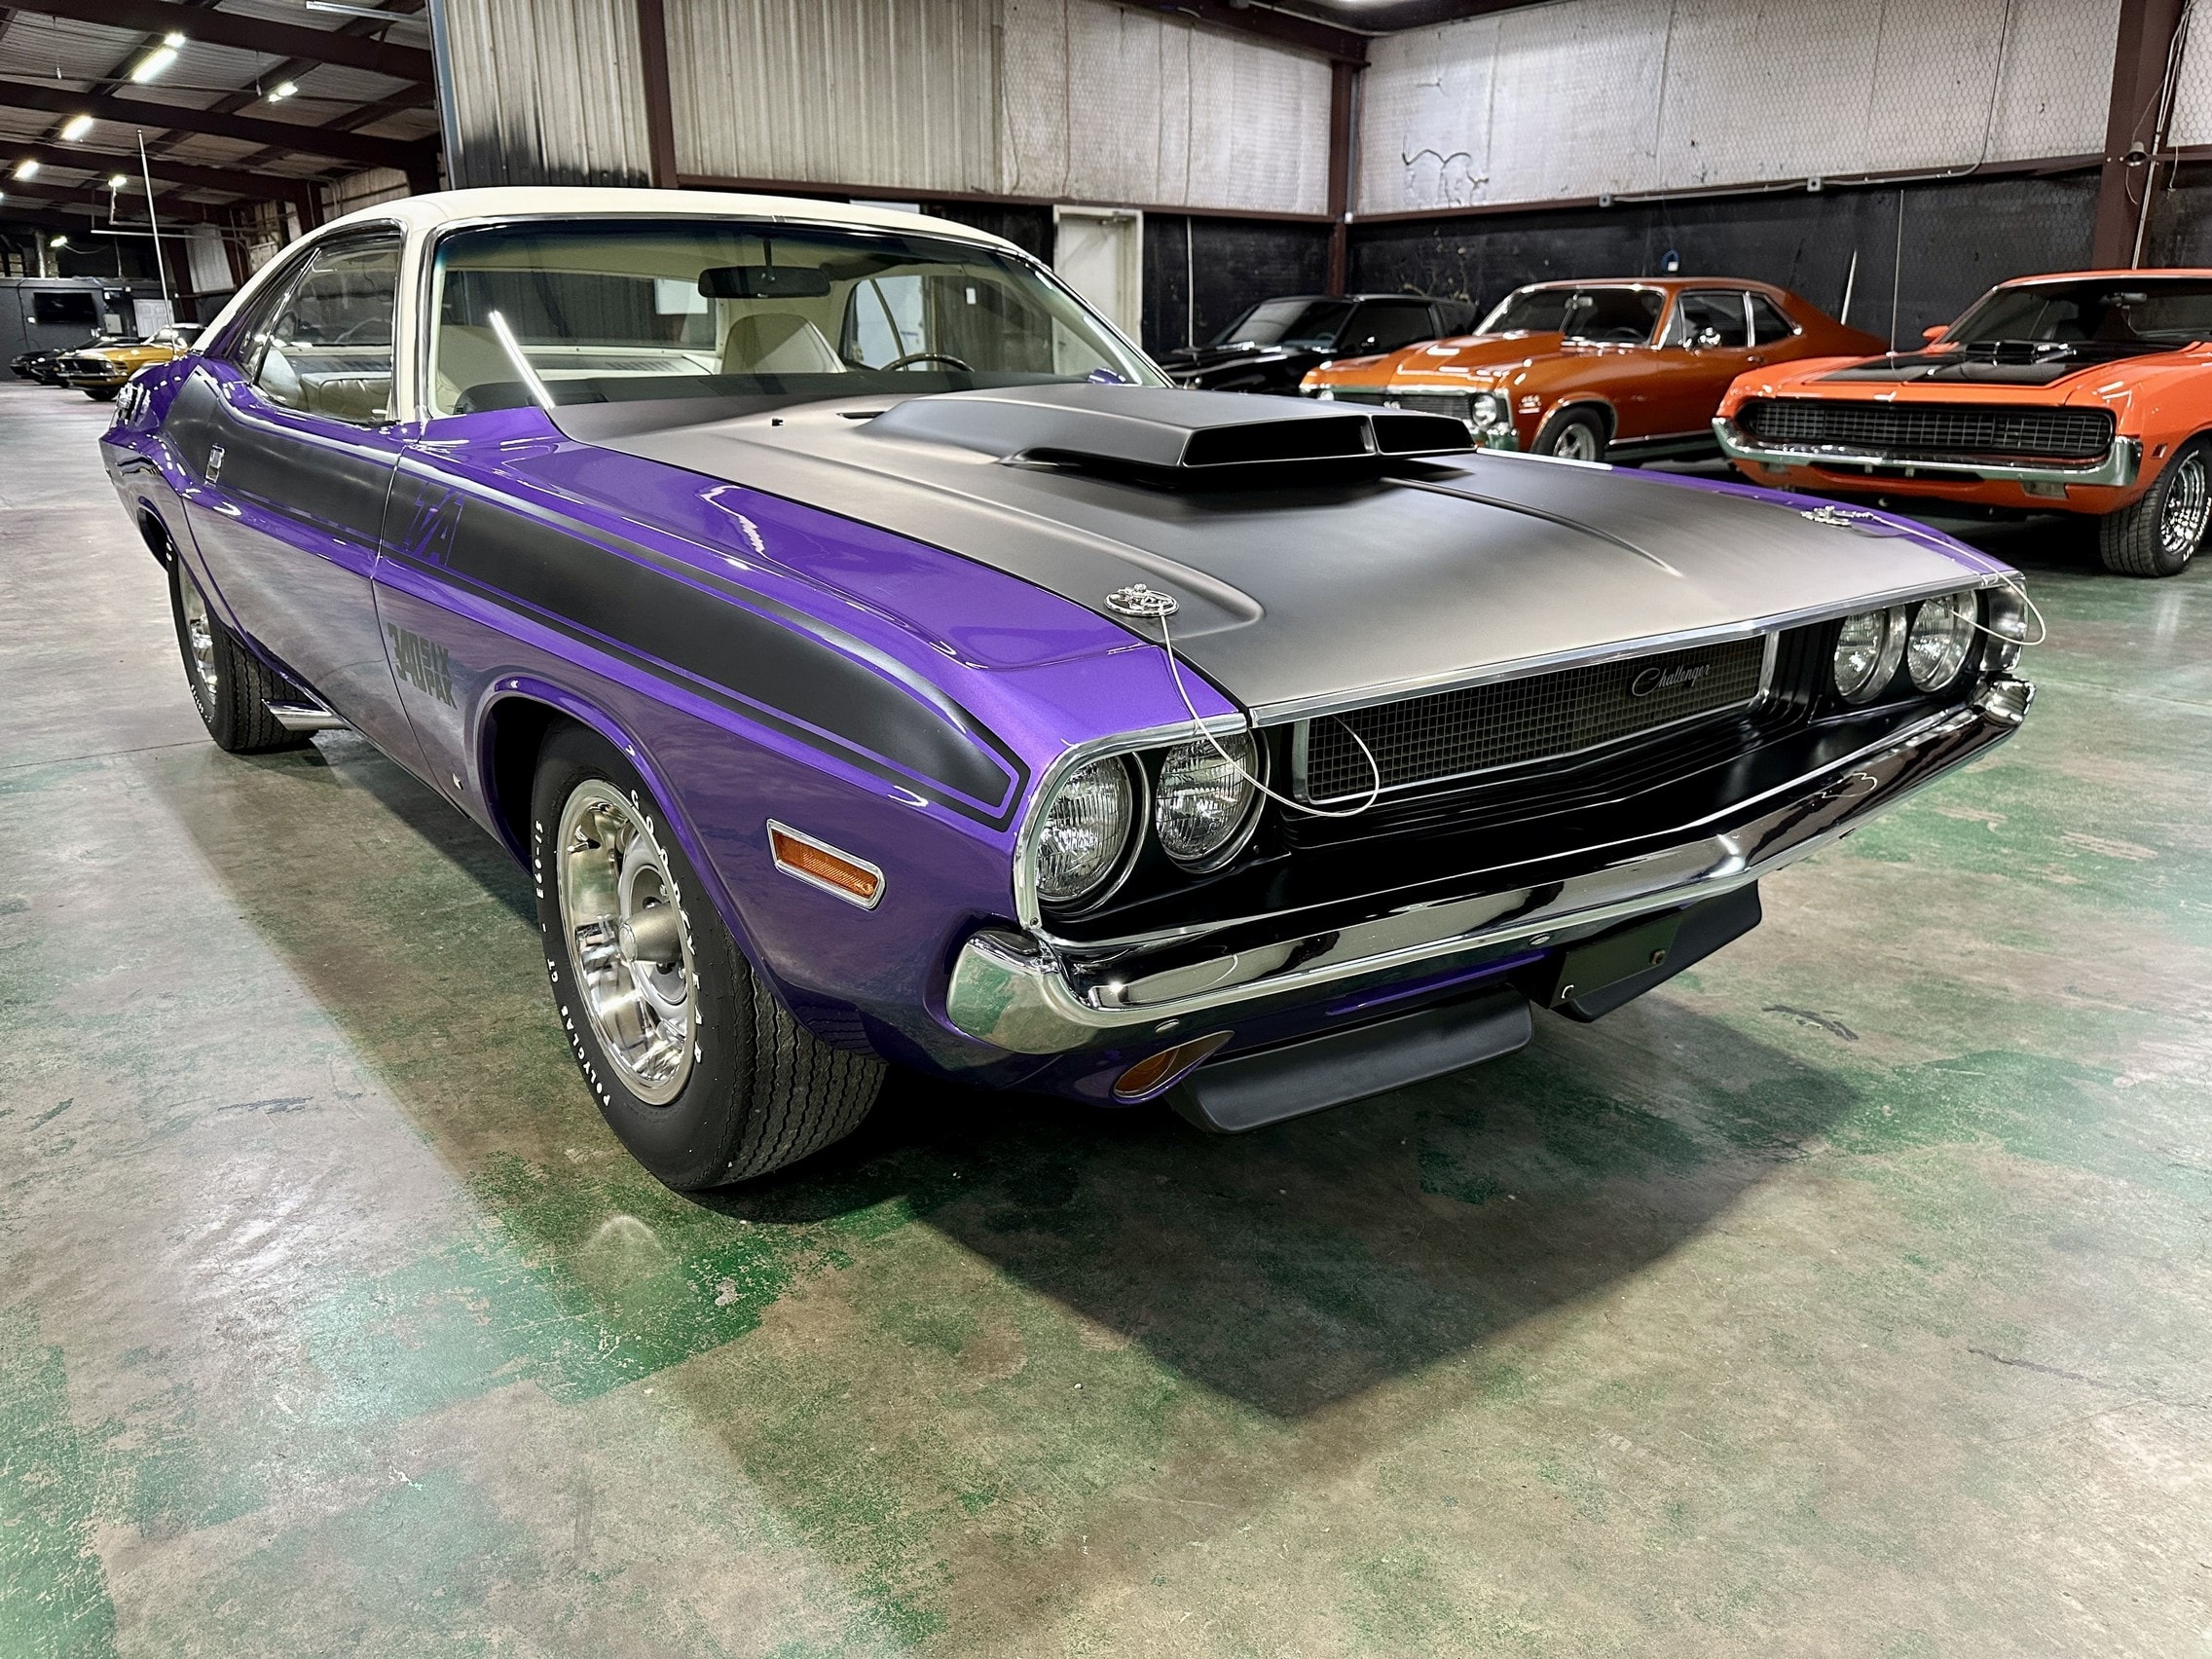 Iconic Dodge Challenger History, Restoration, and Auction